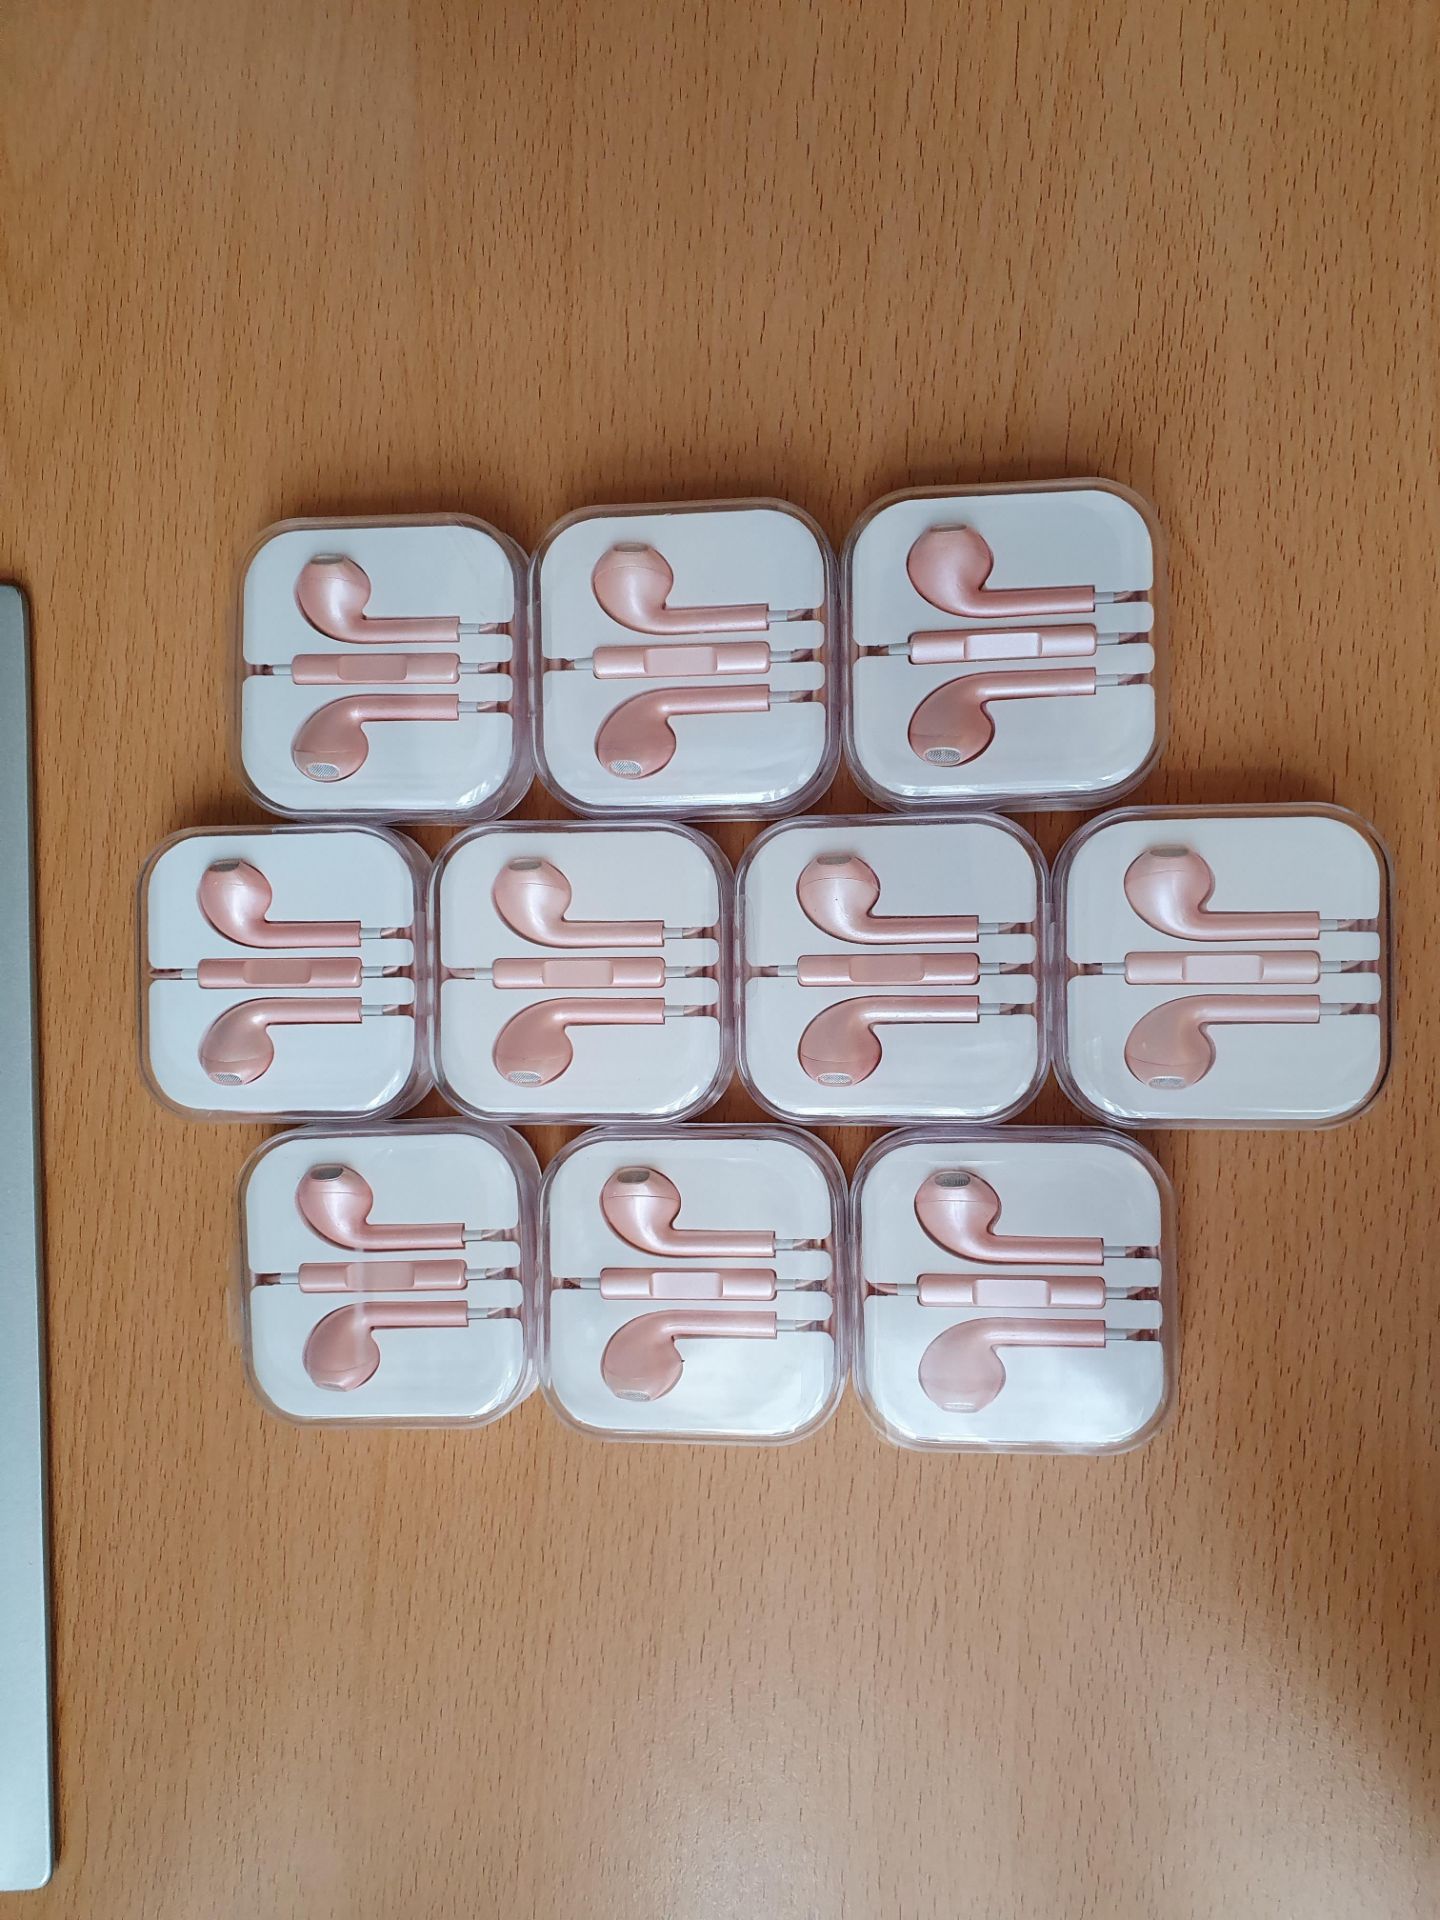 10 x new rose gold earphones rrp £50 pwerfect xmas gifts